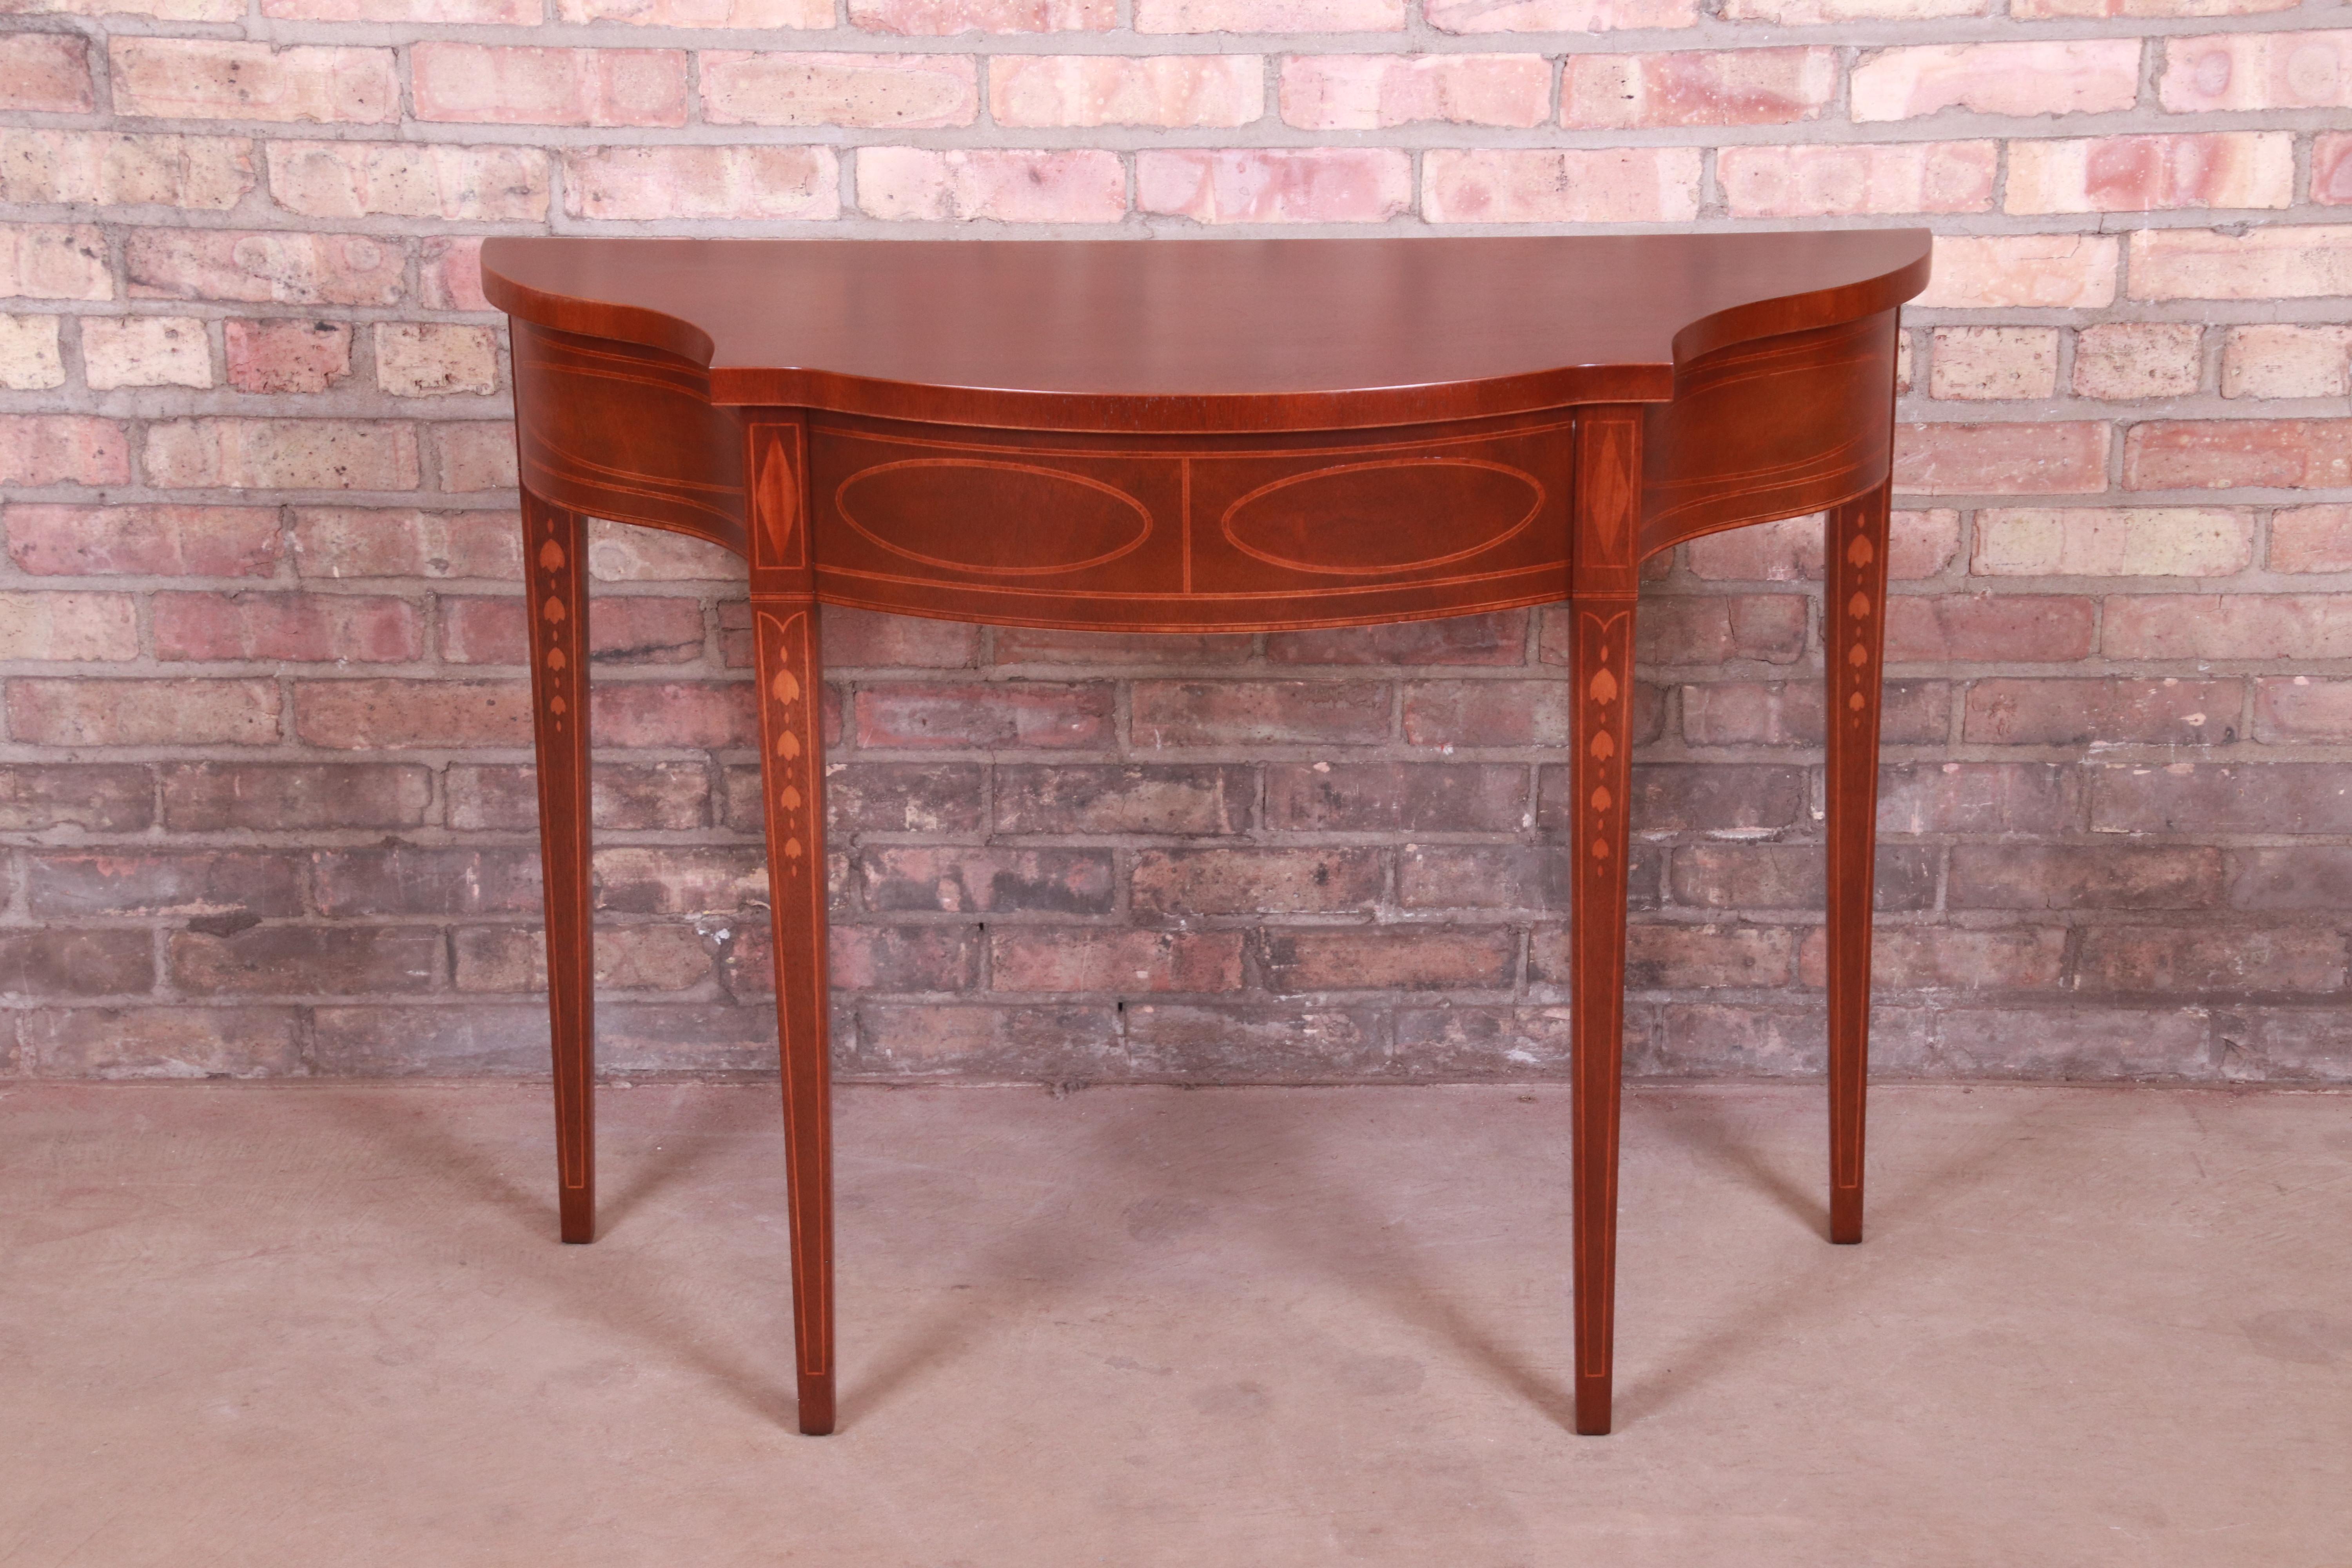 A gorgeous Federal style console or entry table

By Baker Furniture 